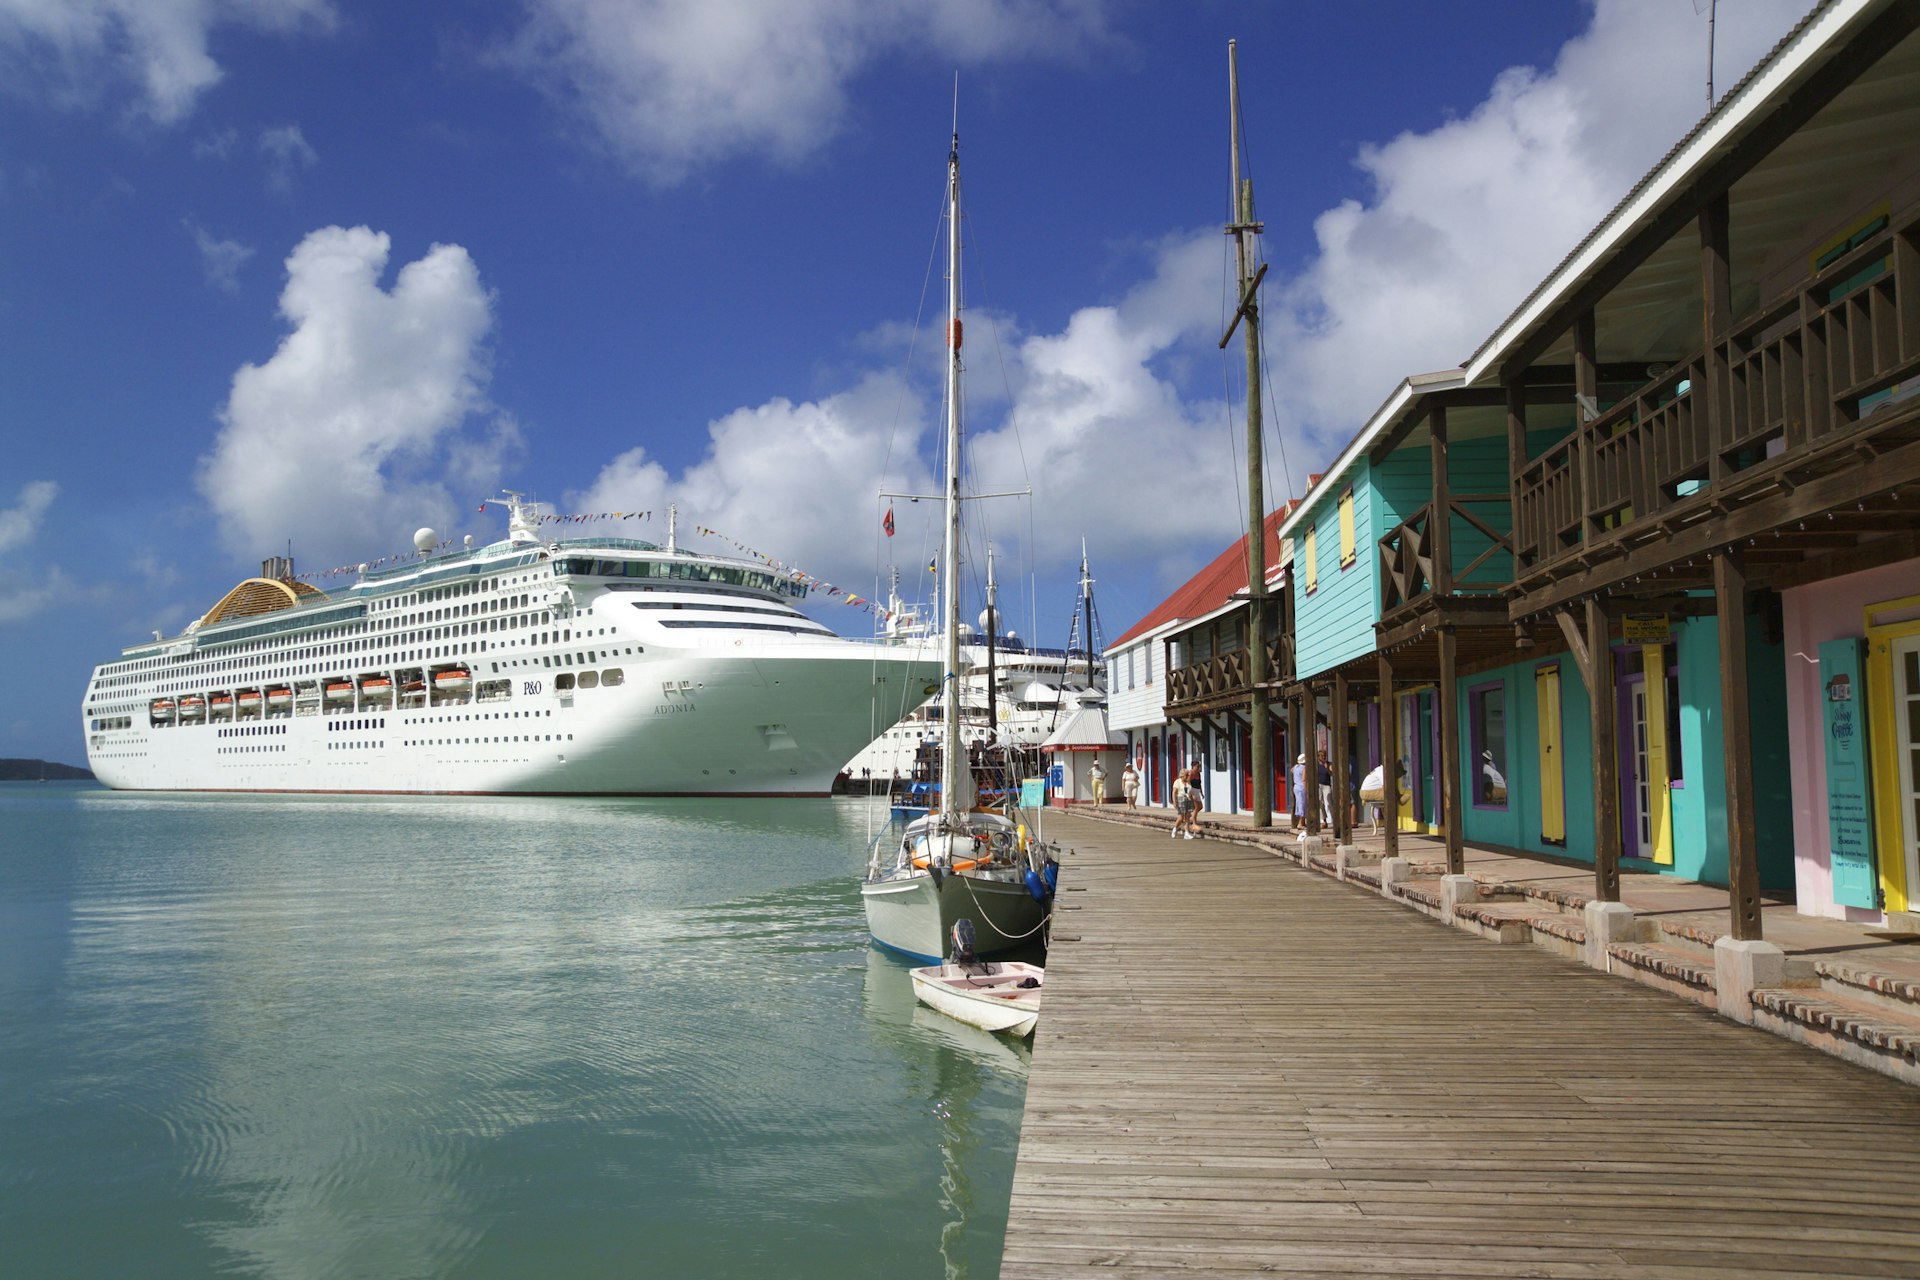 A cruise ship docking at a pier with colorful wooden buildings